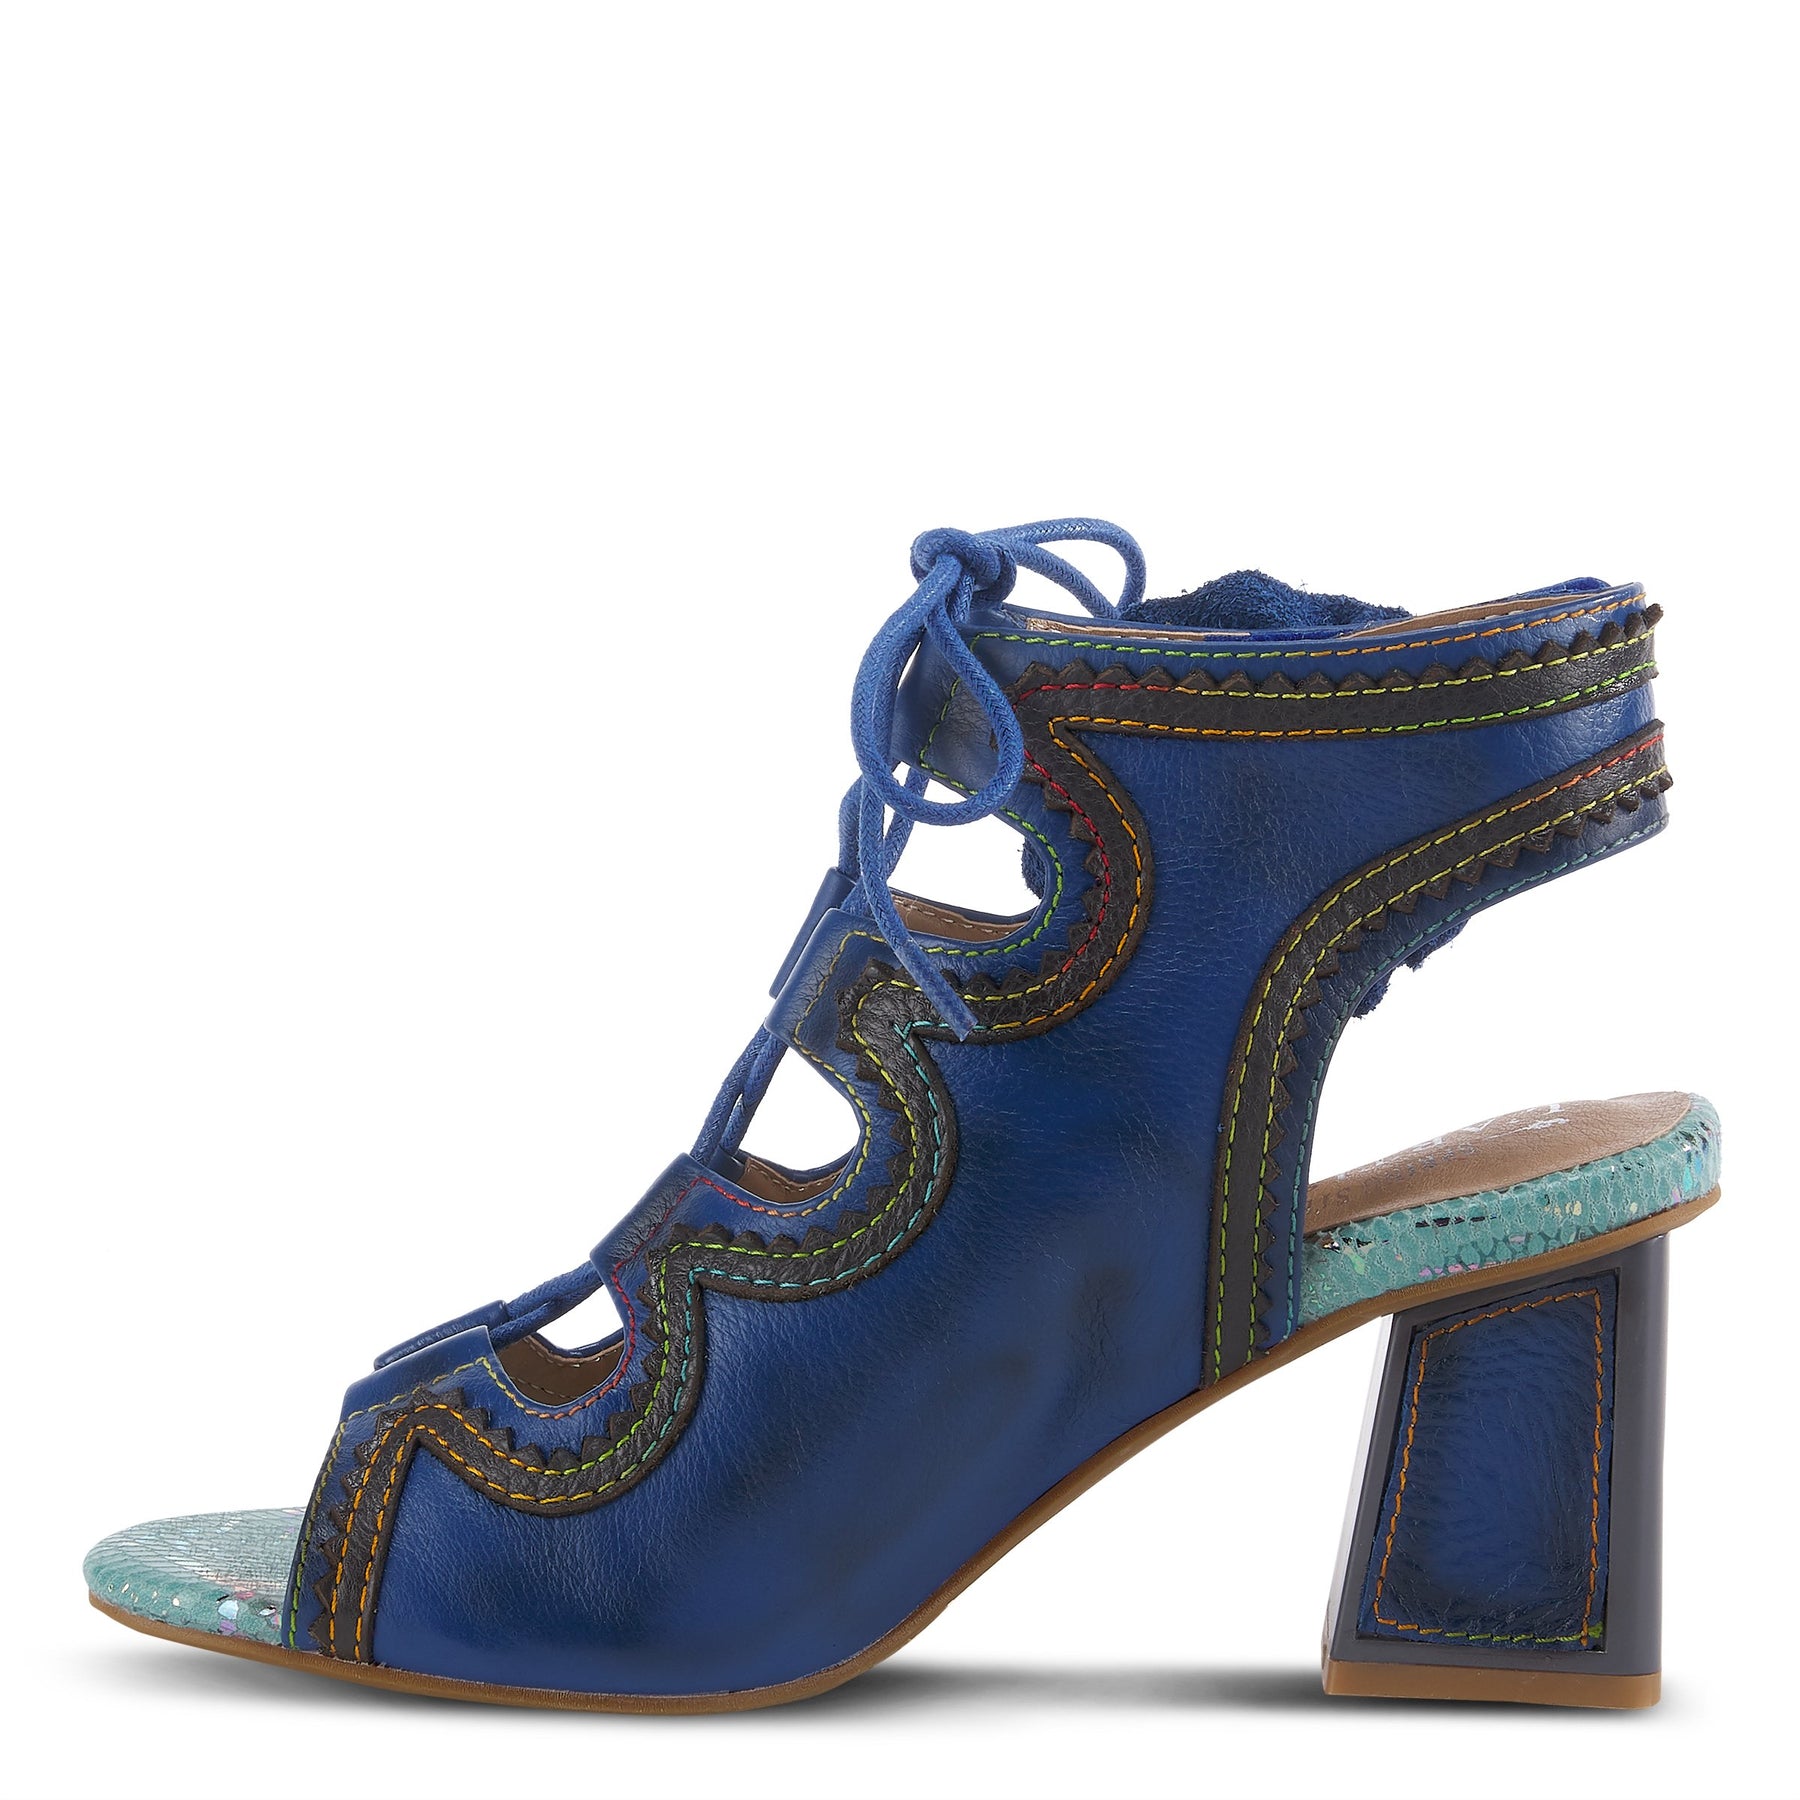 SUPERCUTE ANKLE STRAP SANDAL by L'ARTISTE – Spring Step Shoes